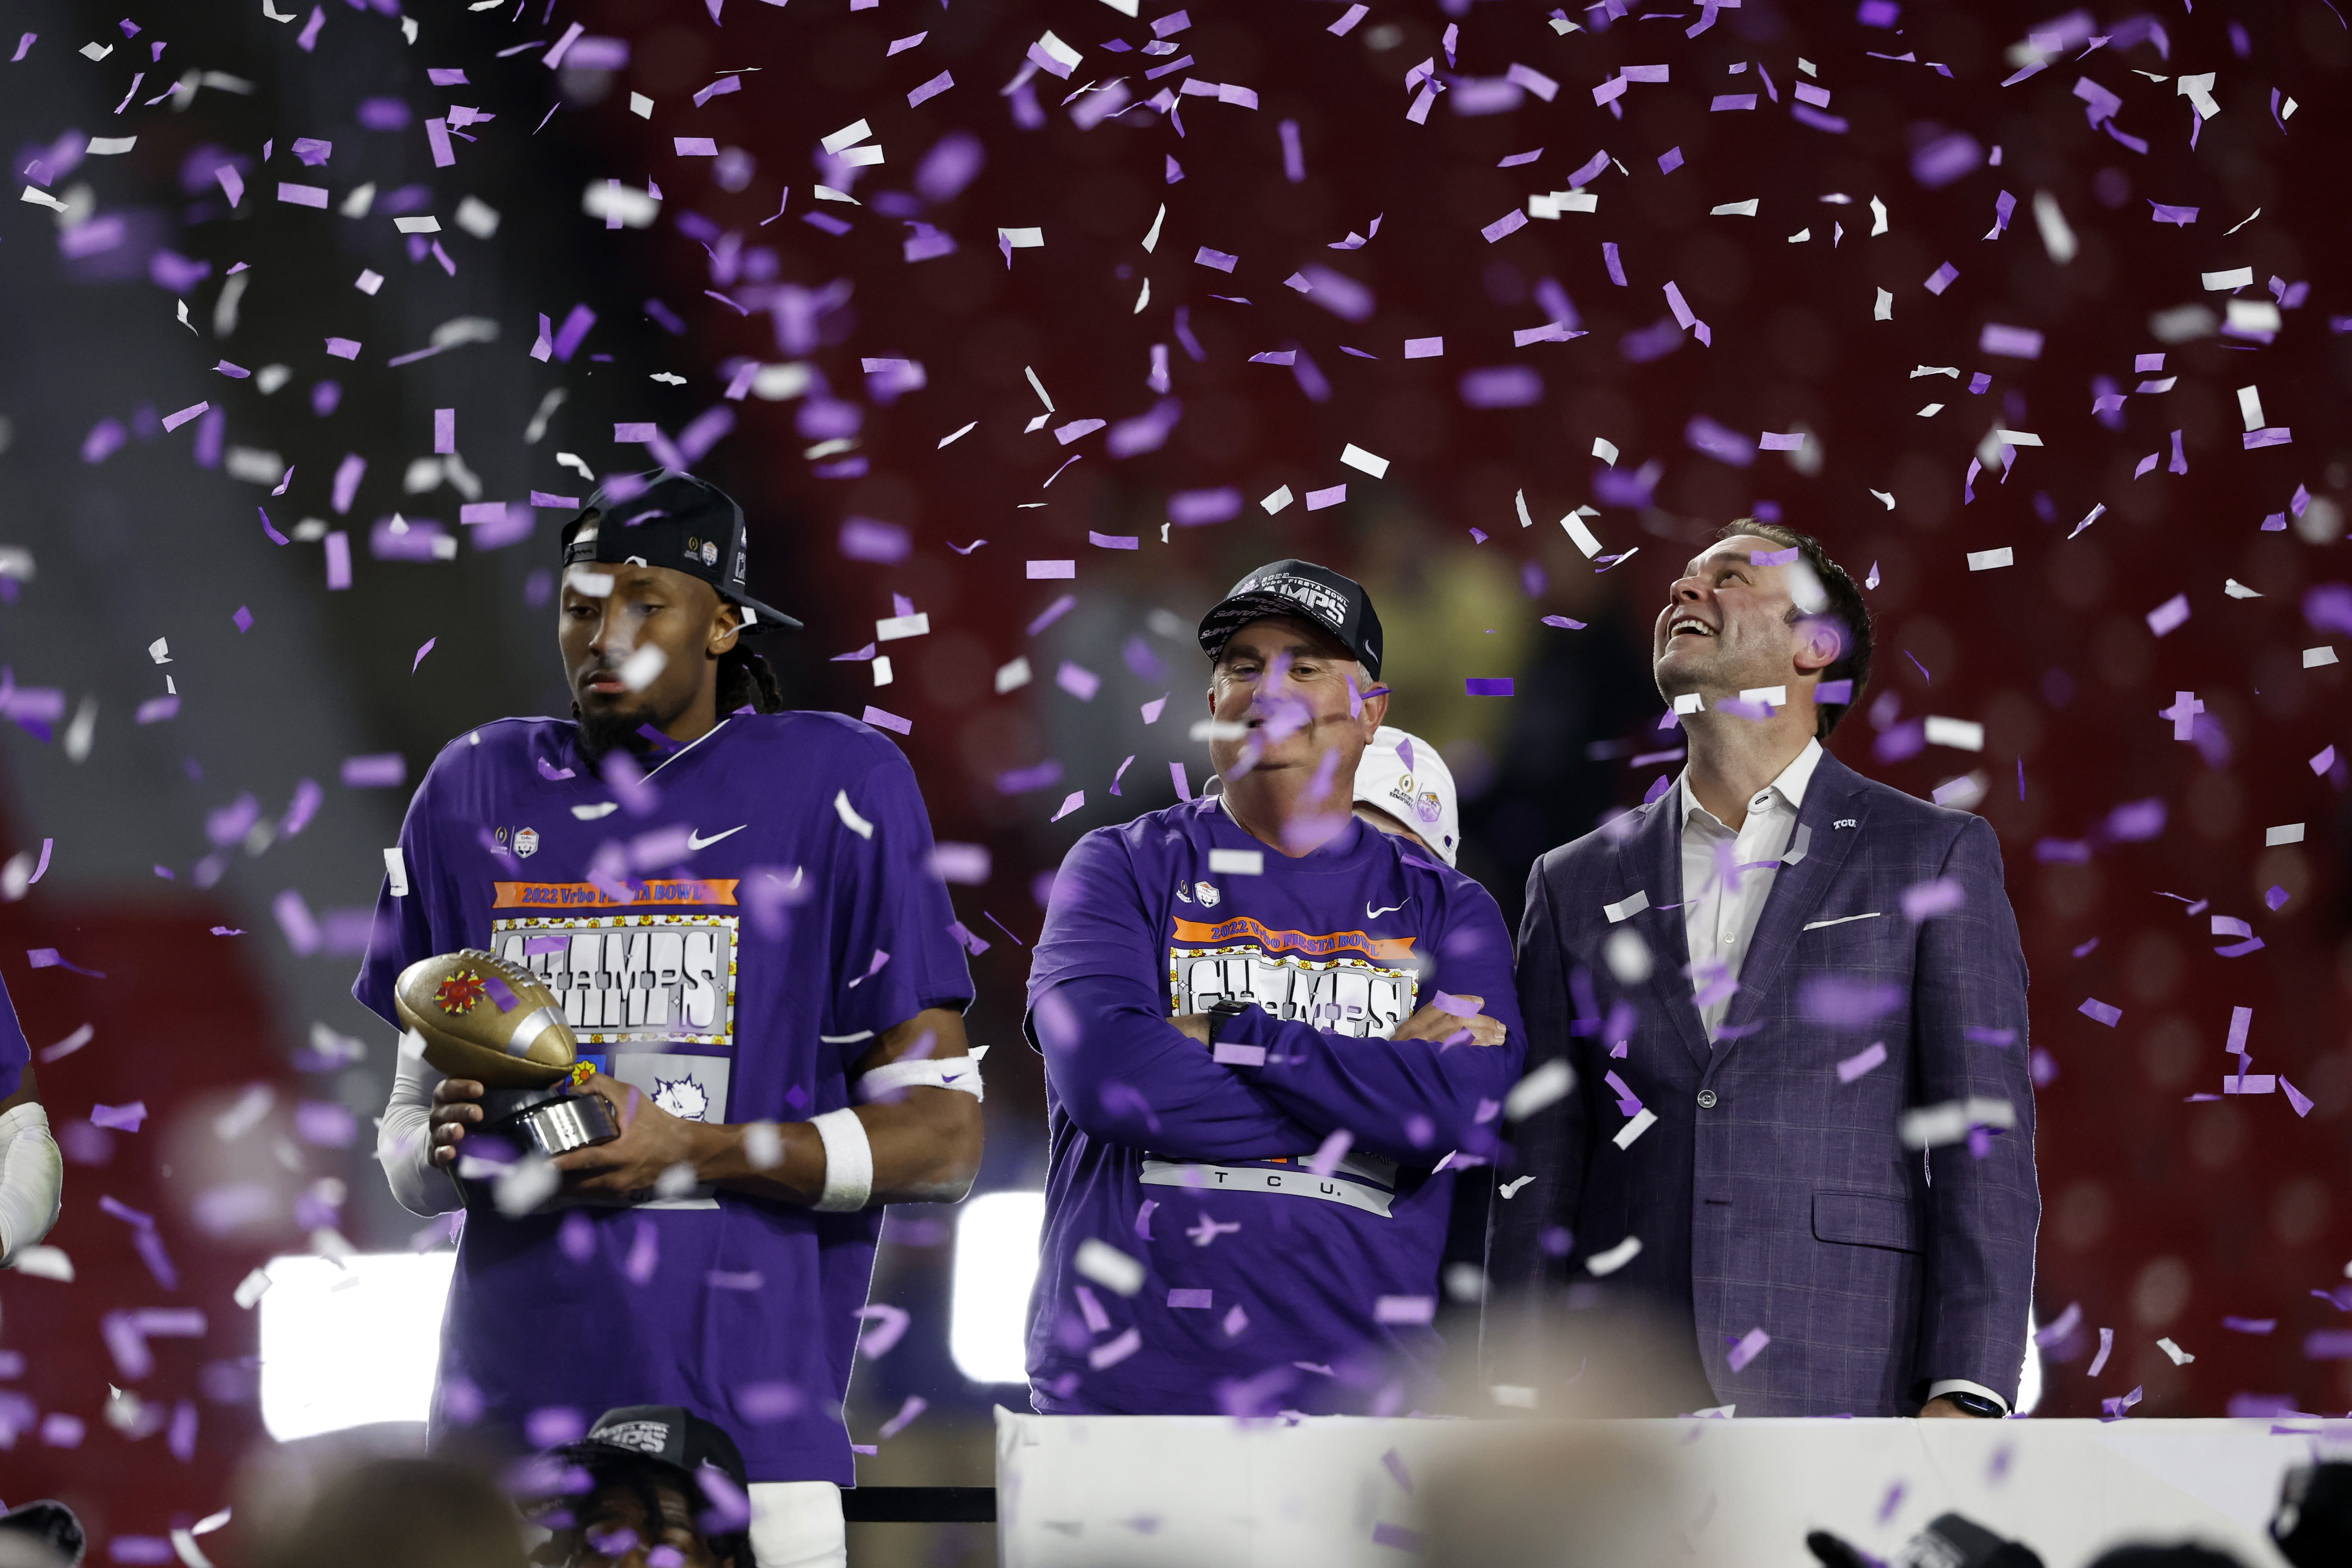 Wide receiver Quentin Johnston, head coach Sonny Dykes and athletic director Jeremiah Donati of the TCU Horned Frogs stand on the podium after defeating the Michigan Wolverines 51-45 during the Vrbo Fiesta Bowl at State Farm Stadium on December 31, 2022 in Glendale, Arizona.